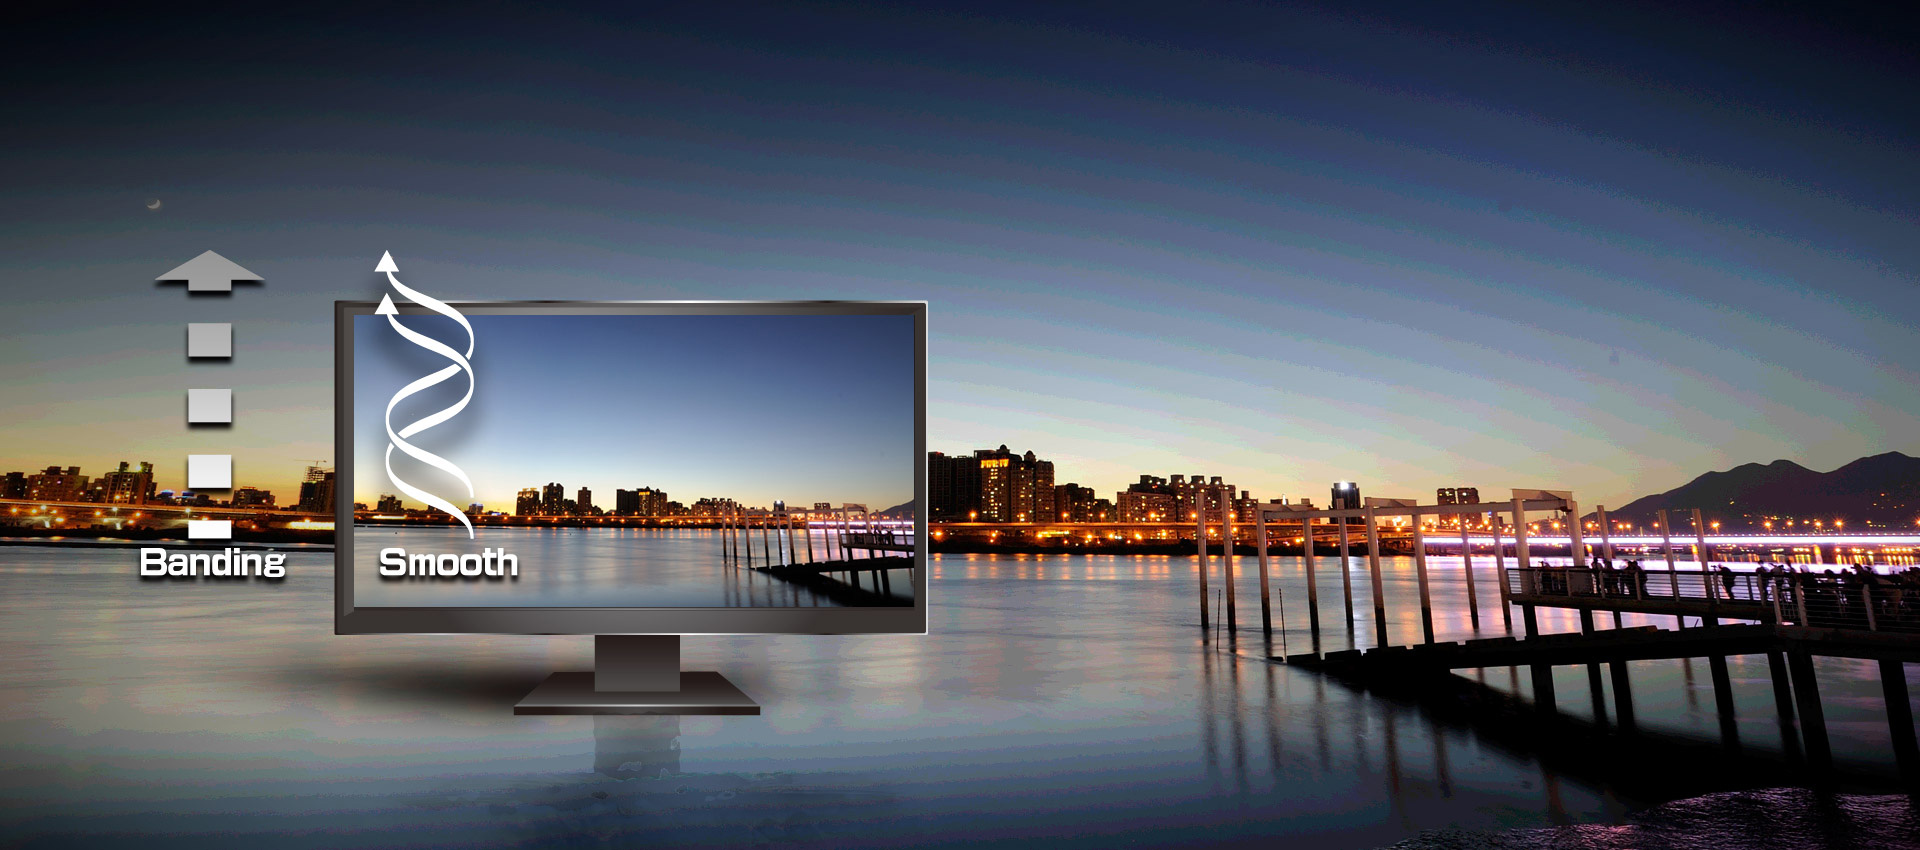 A computer monitor graphic with smooth and banding graphics next to it. The background image is an ocean pier with city lights on at night